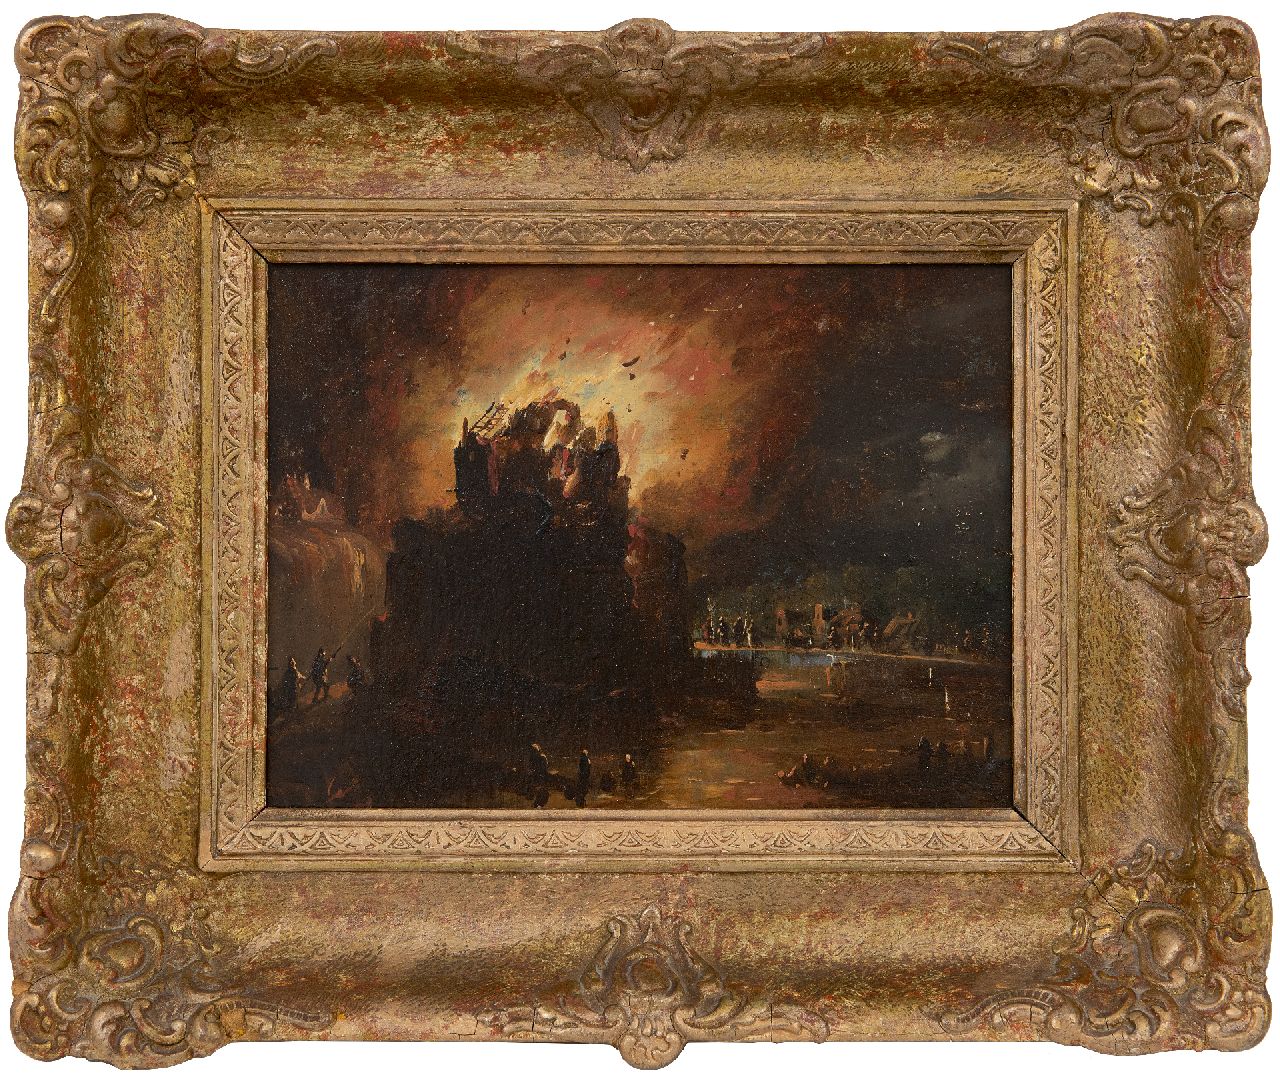 Cate H.G. ten | Hendrik Gerrit ten Cate | Paintings offered for sale | The fire, oil on panel 18.6 x 24.2 cm, signed l.r.